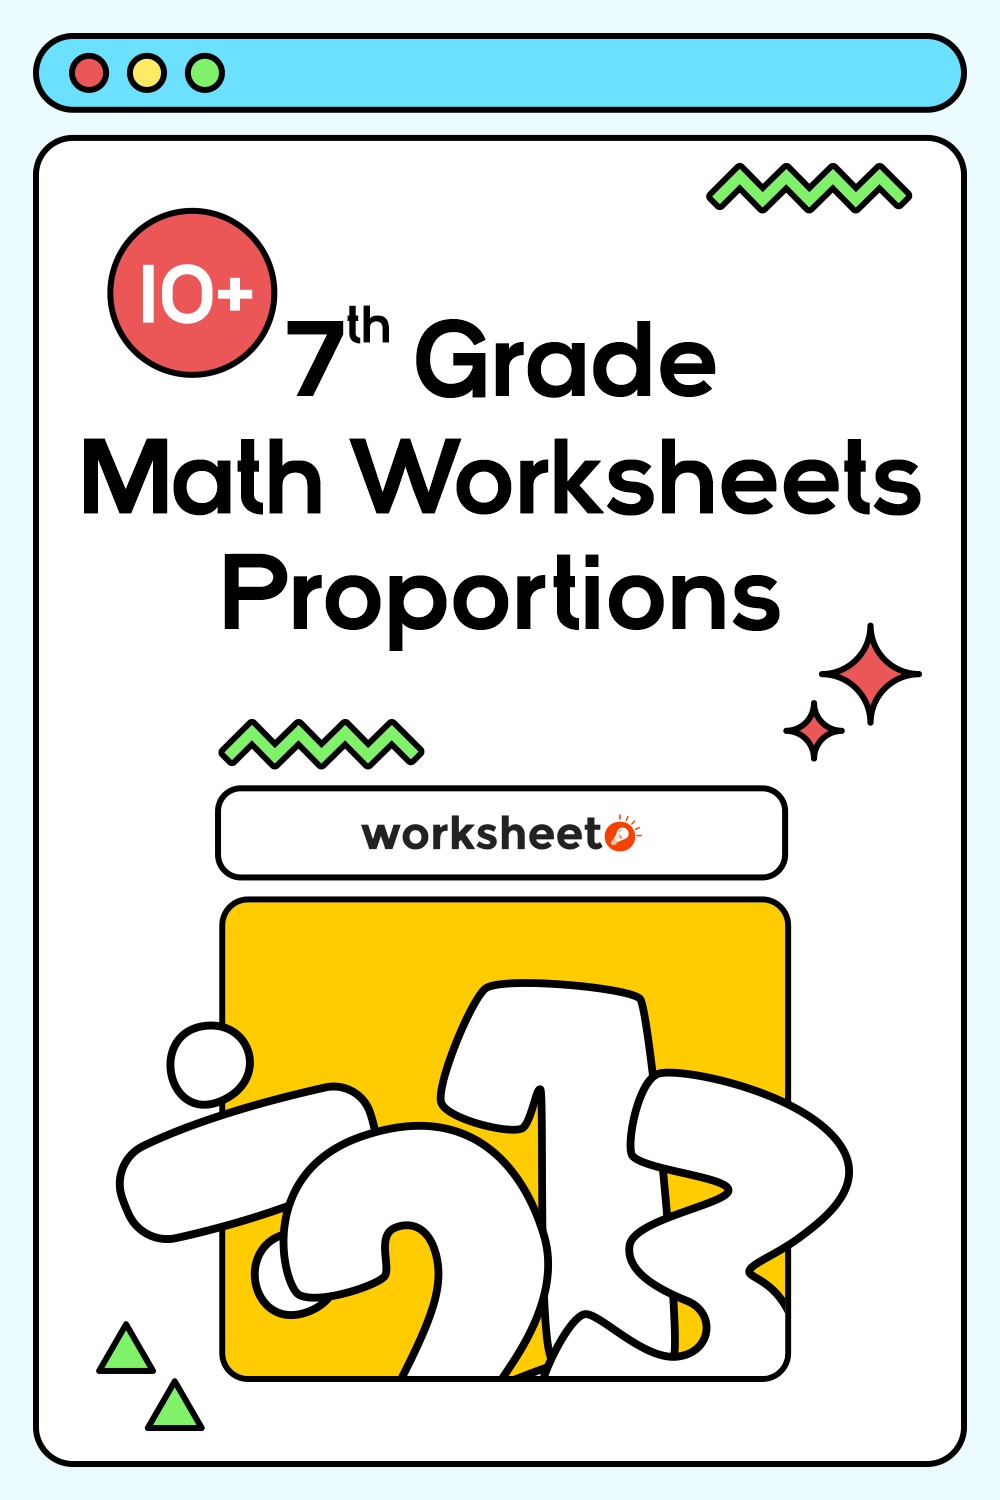 14 Images of 7th Grade Math Worksheets Proportions